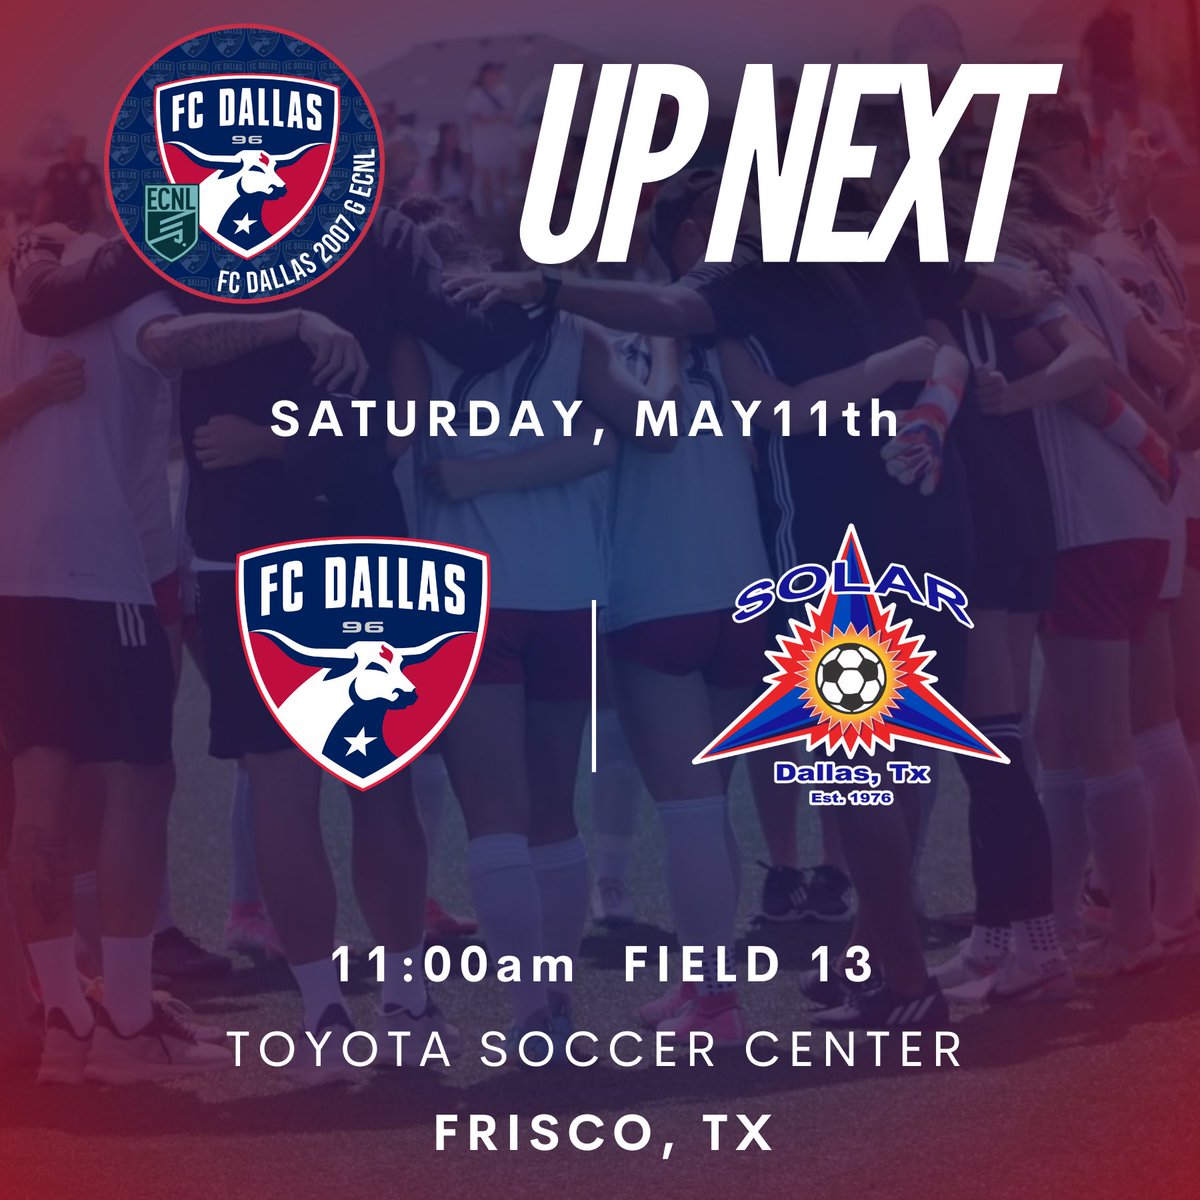 Mark ✍🏻 your calendars for Saturday, we are down to 2 games left in the TX Conference and you don’t want to miss this matchup‼️ #DTID | #HeartAndHustle 🗓️ Saturday 5/11 ⏰ 11:00am 📍 Toyota | Field 13 @FCDwomen | @ECNLgirls